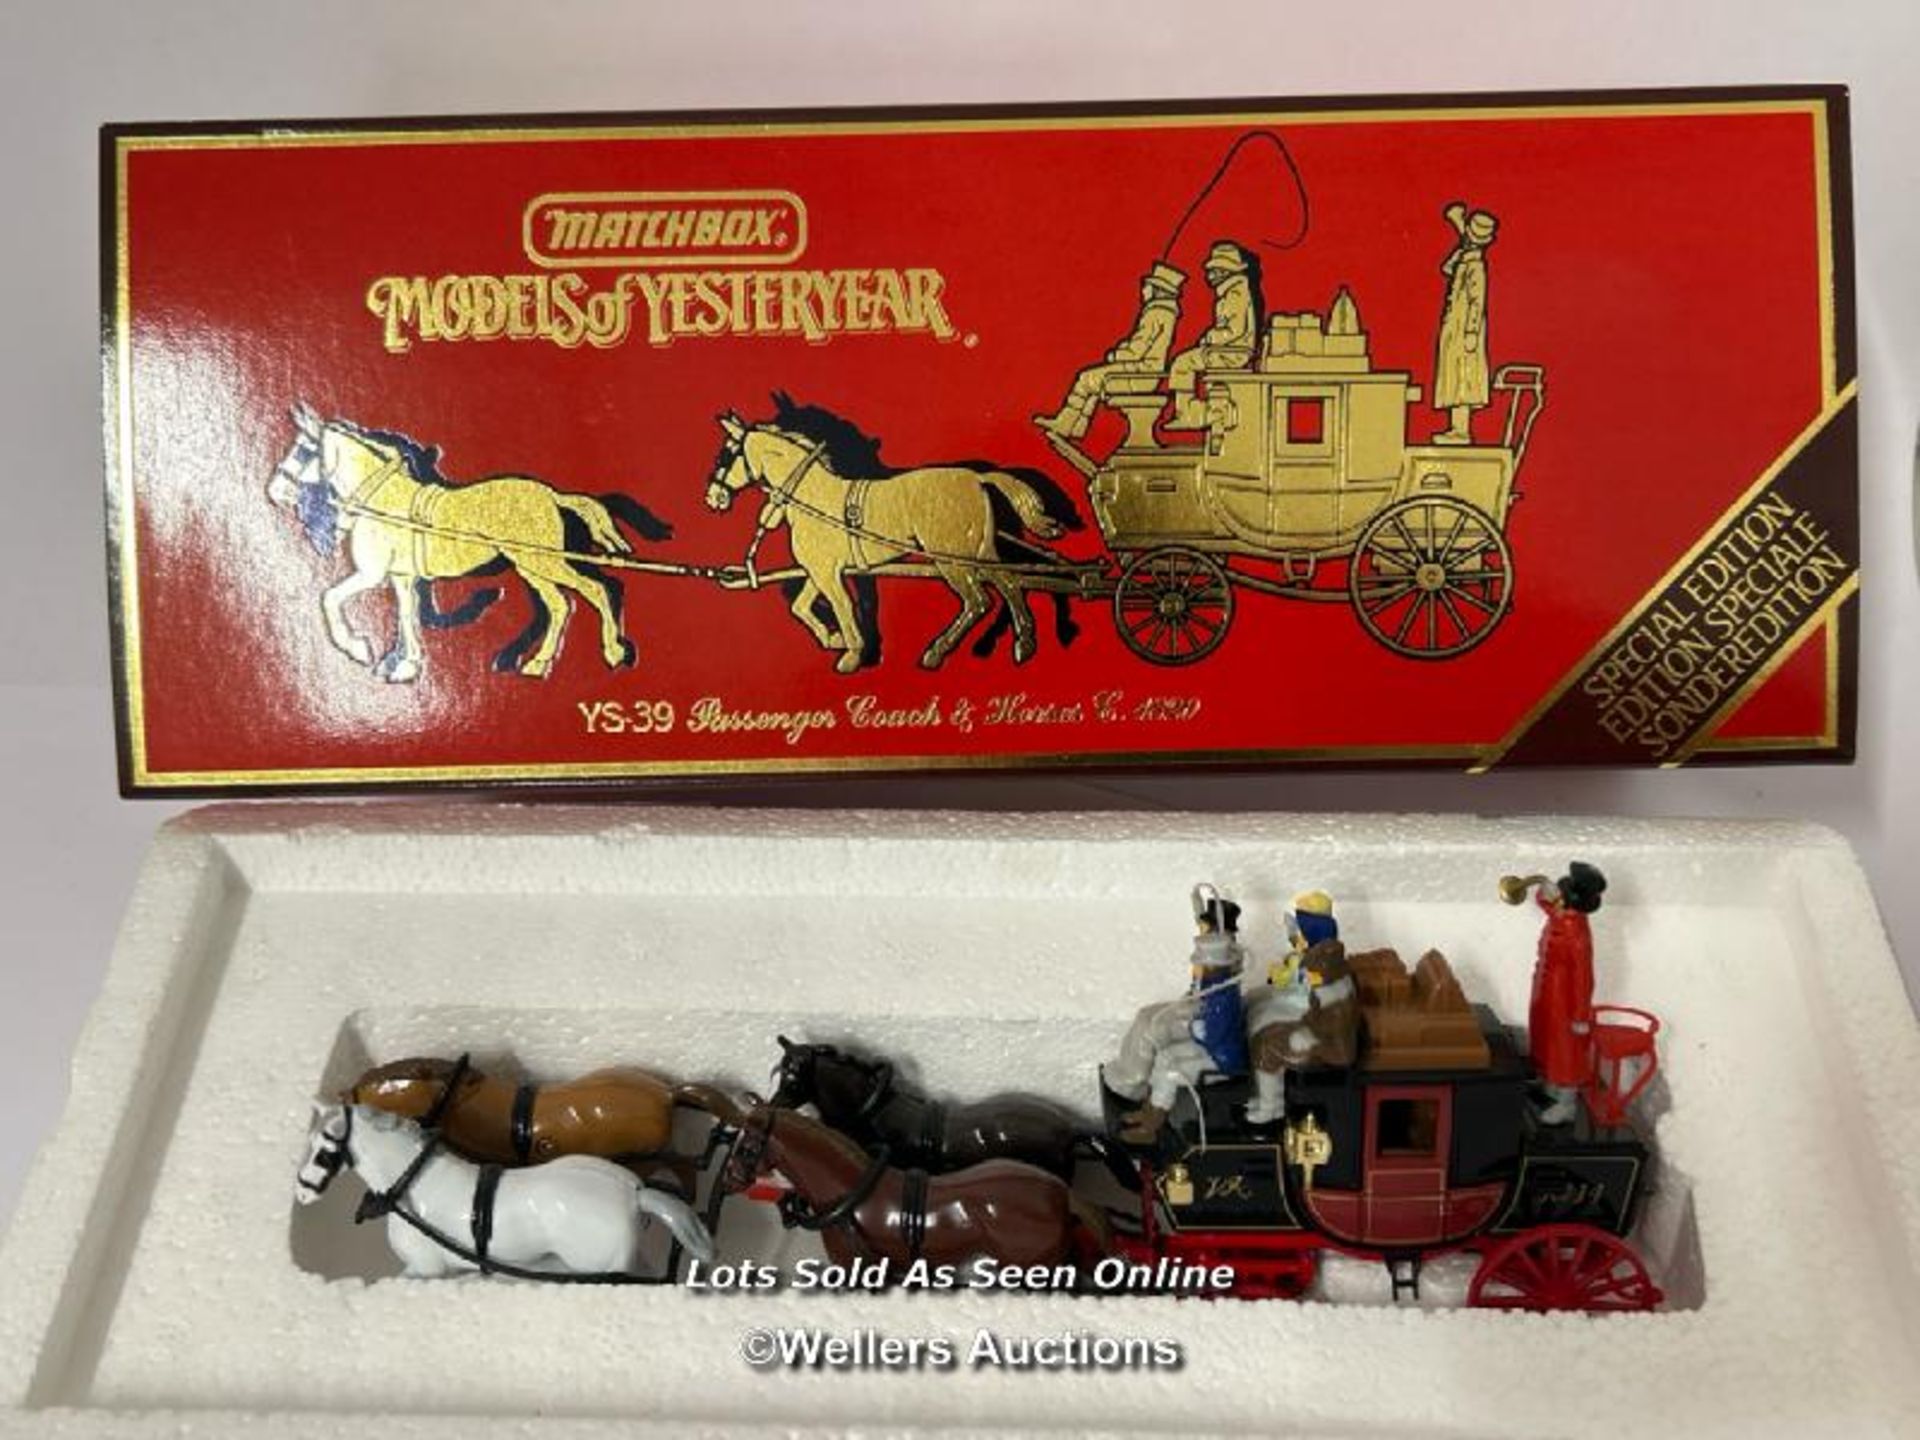 Matchbox Models of Yesteryear Passenger Coach & Horses c1820, YS-39, limited edition, boxed